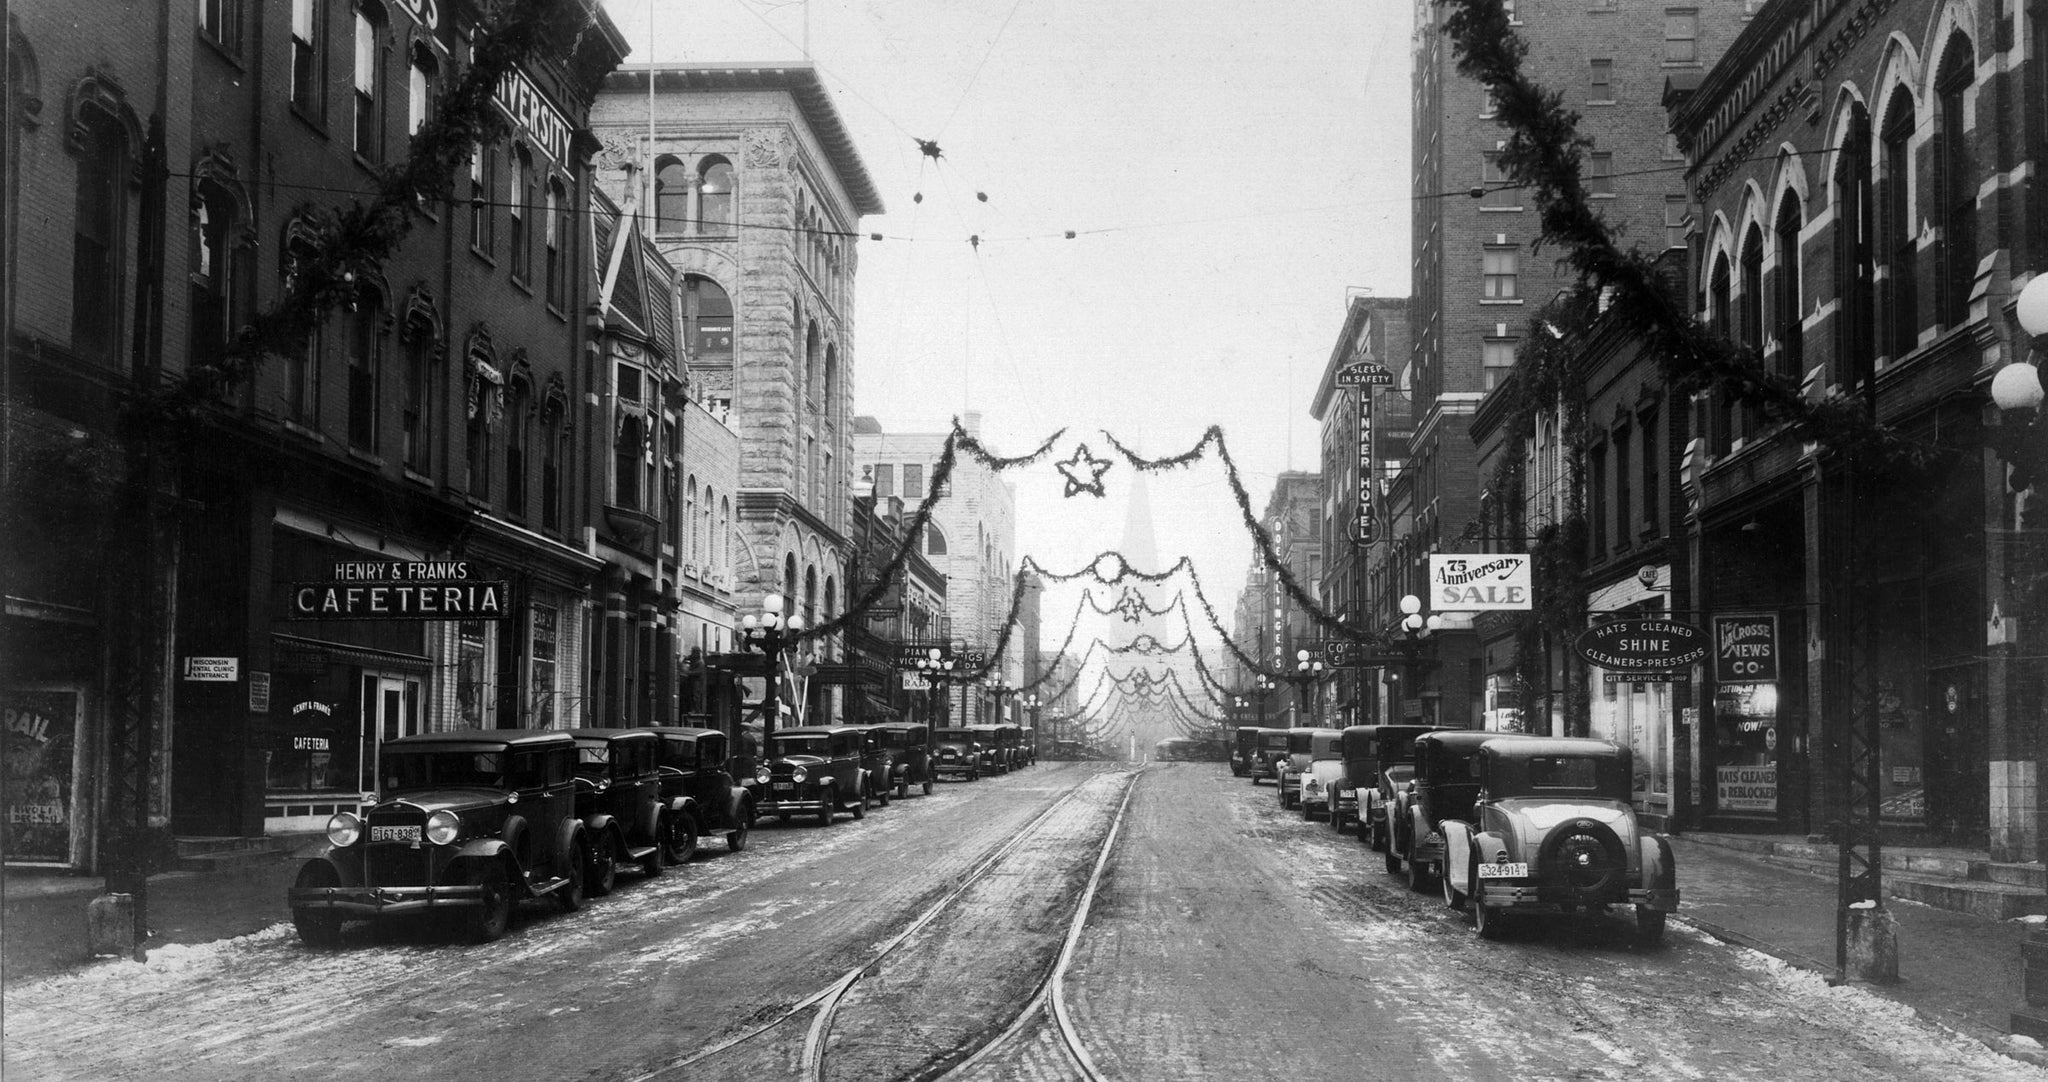 Looking east at the Christmas decorations on Main Street in 1930. -- LA CROSSE PUBLIC LIBRARY AND LA CROSSE COUNTY HISTORICAL SOCIETY / PC020-01-24-010